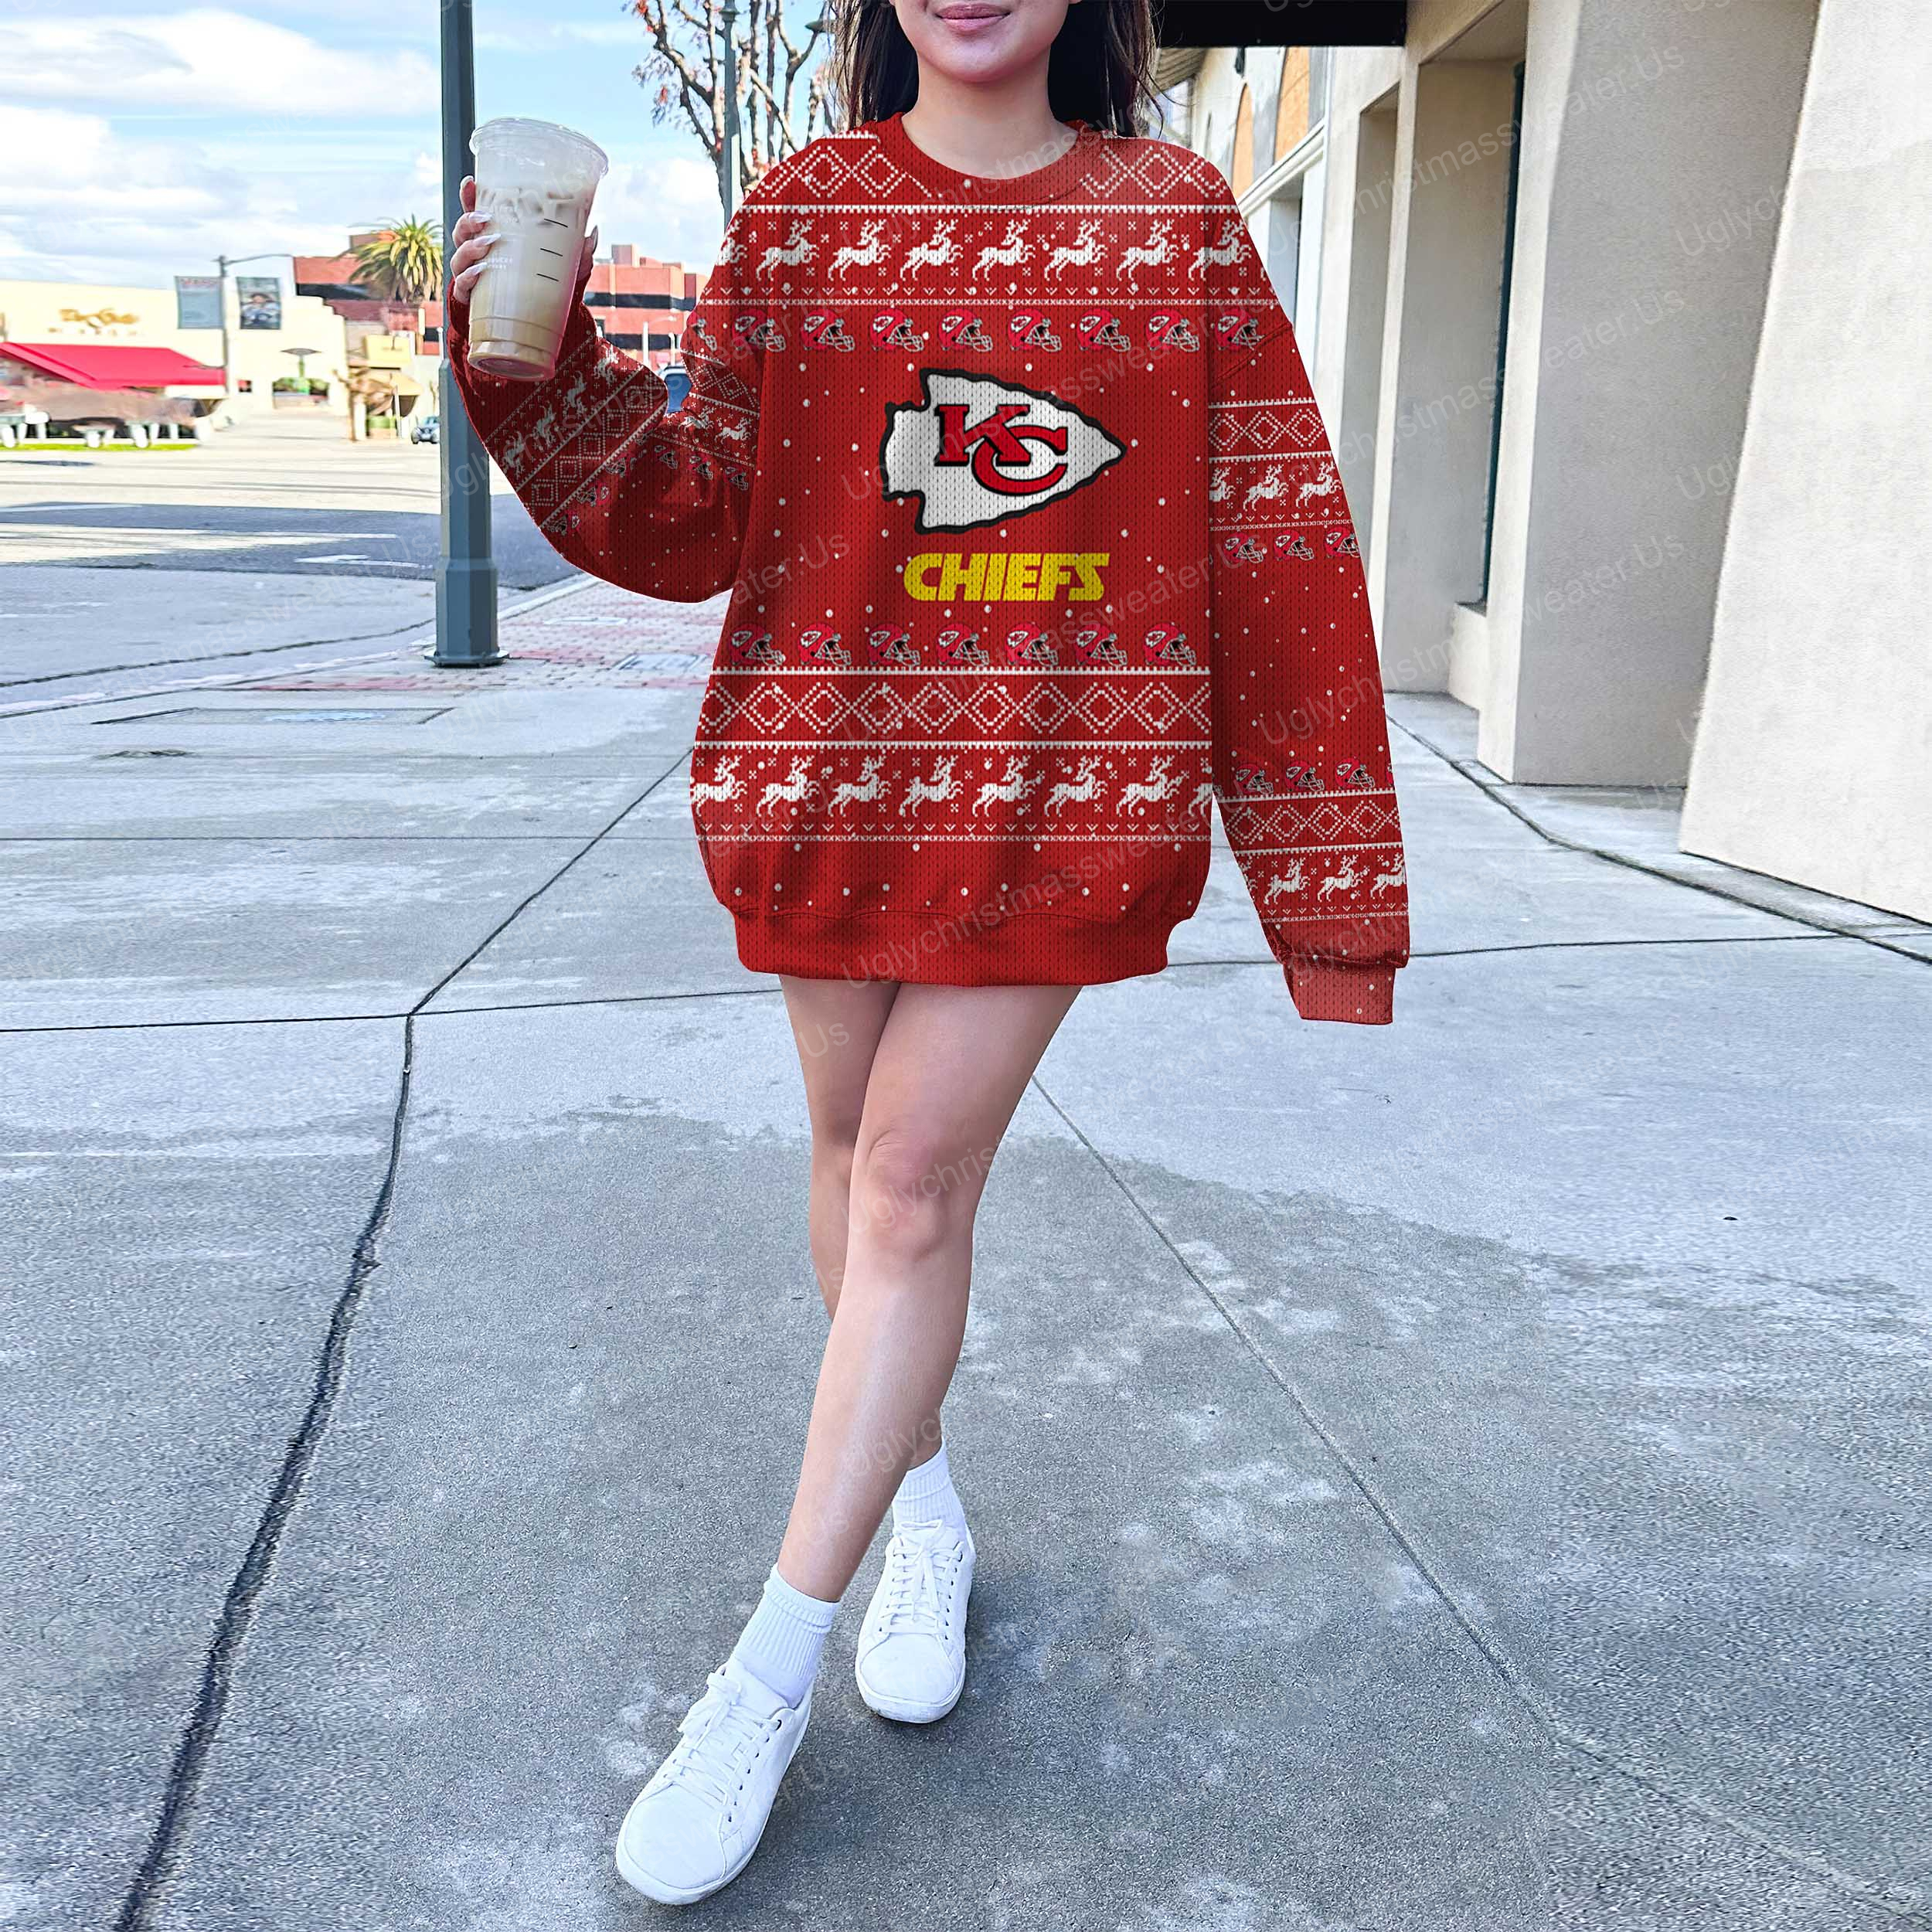 Champion's Choice: Kansas City Chiefs Logo Ugly Sweater White And Red Color